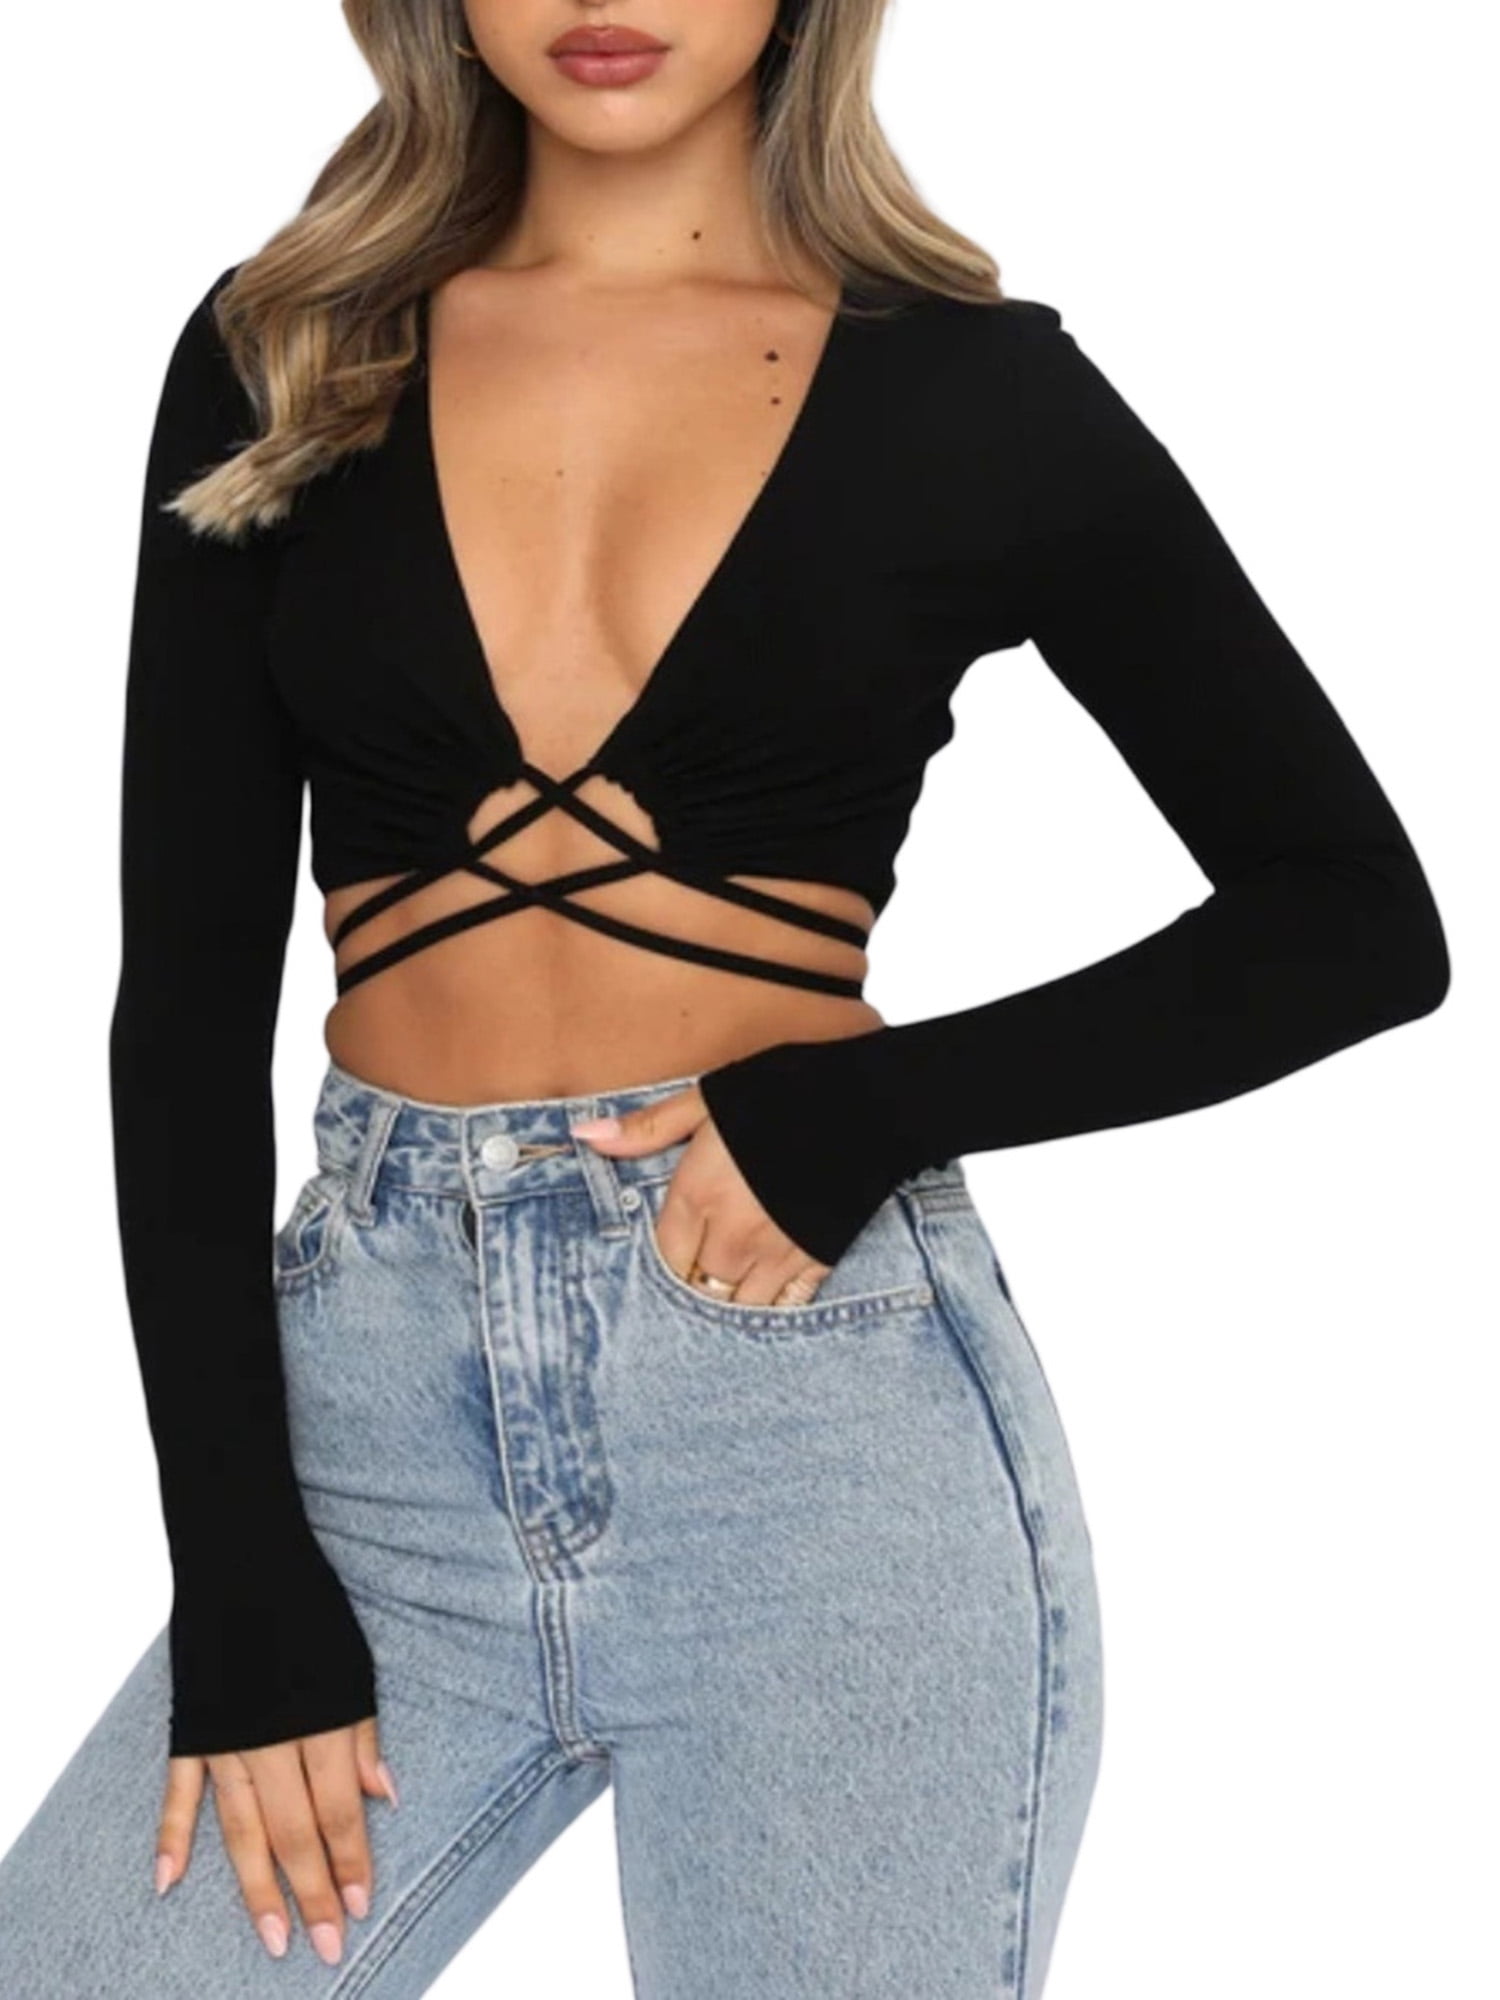 ❣️ ##New#Arrival## ❣️ 💁‍♀ Party wear Crop ToP 💁‍♀ 💞 Grab